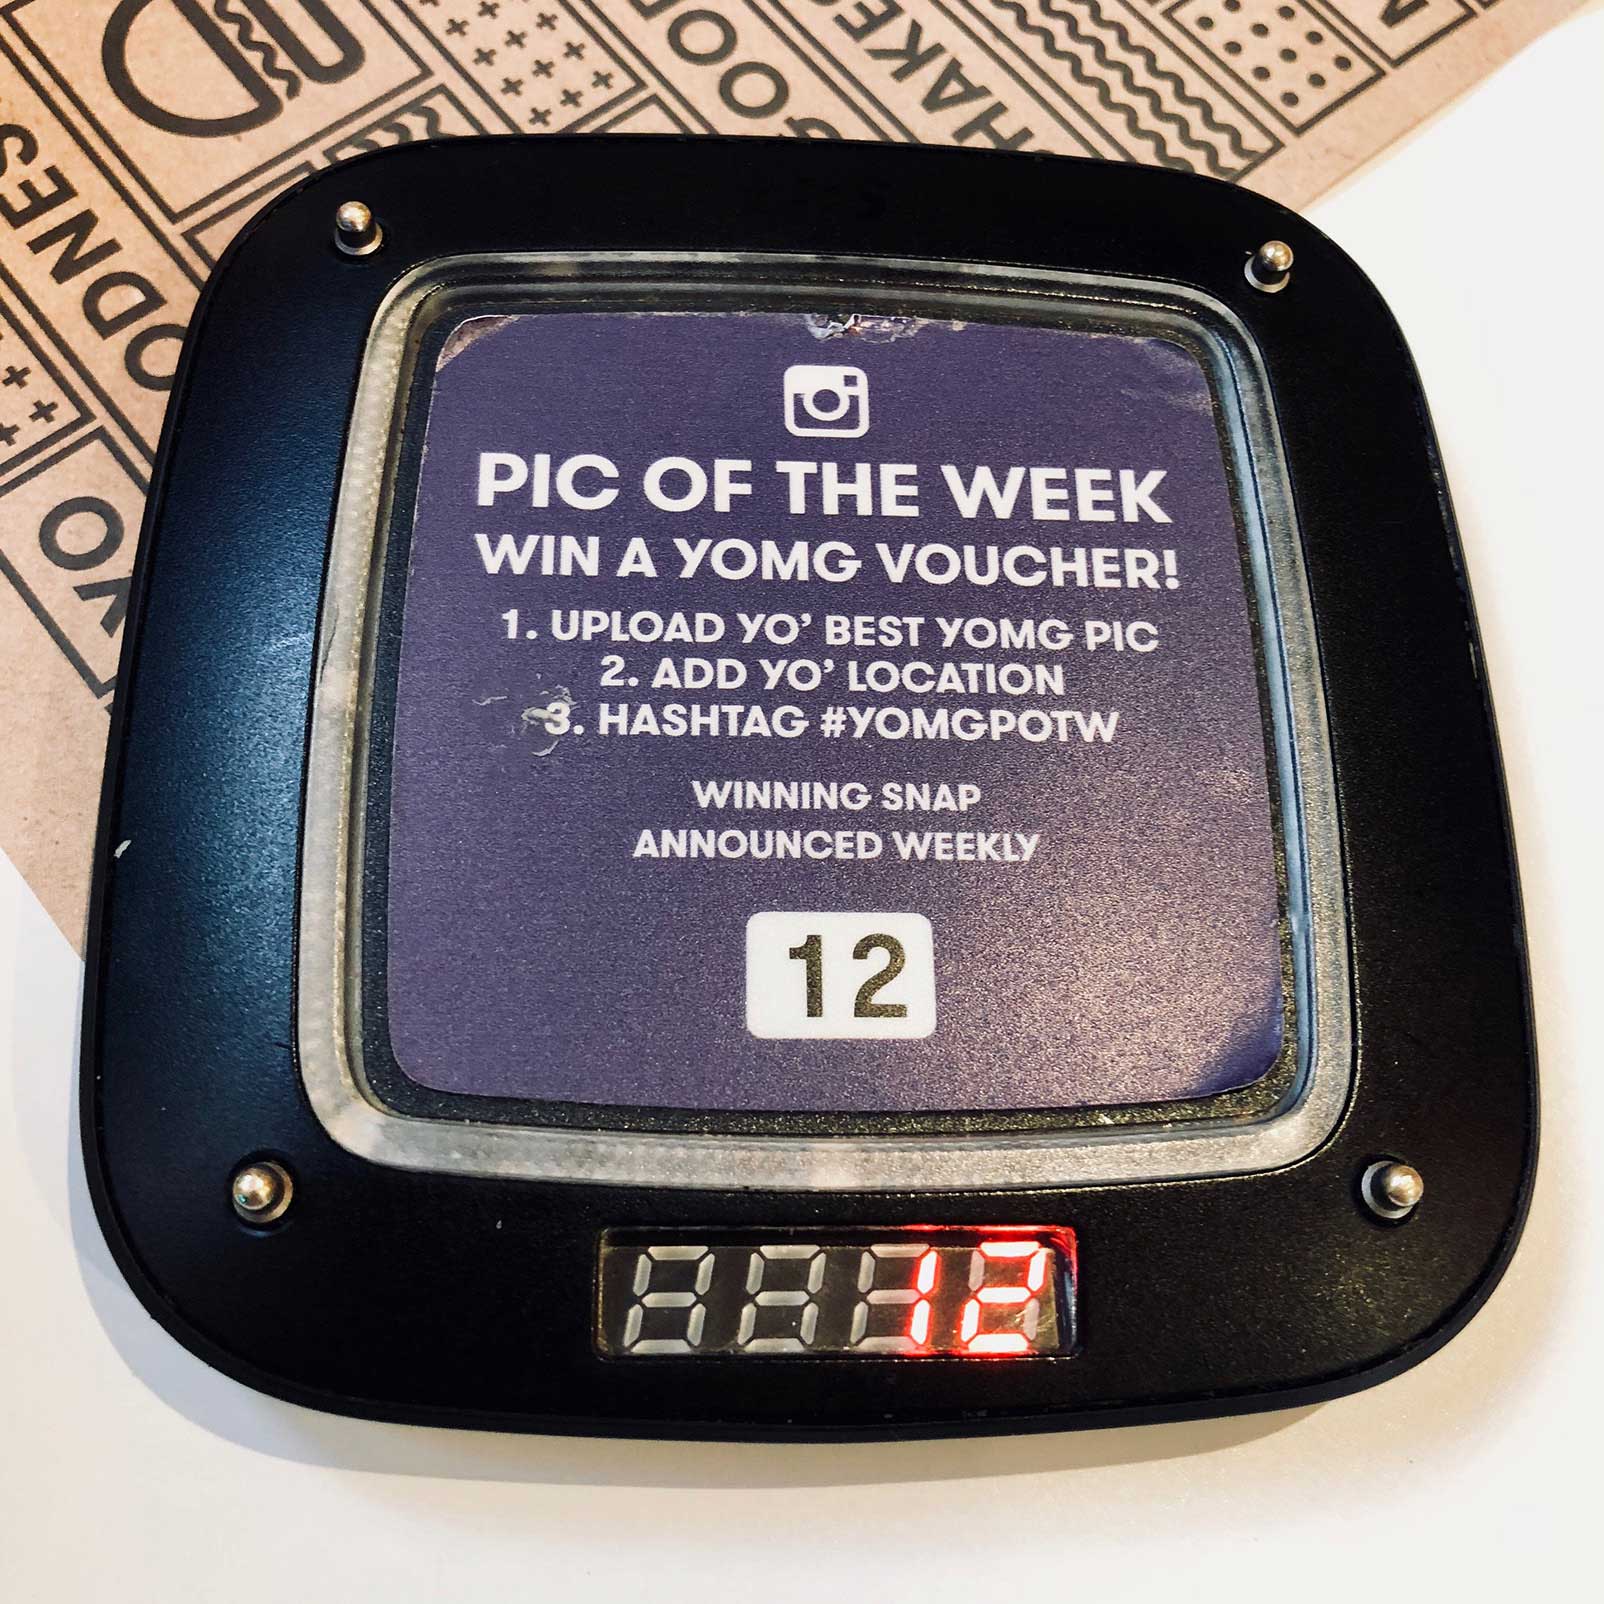 YOMG's photo contest prompt on a coaster-shaped restaurant buzzer